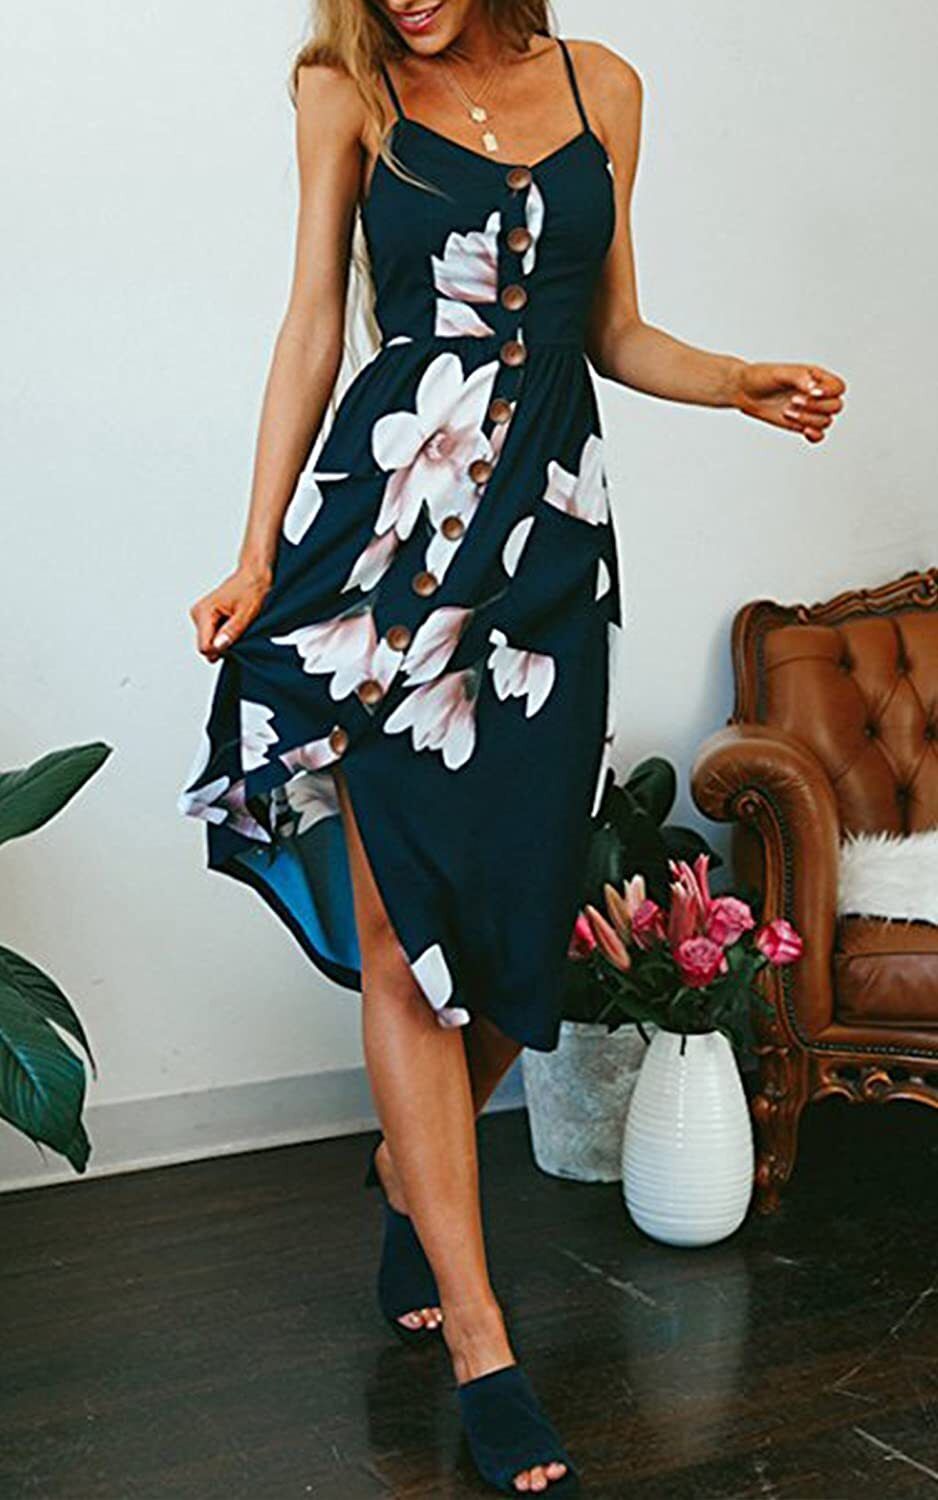 23 Dresses You'll Want To Twirl In | HuffPost Life